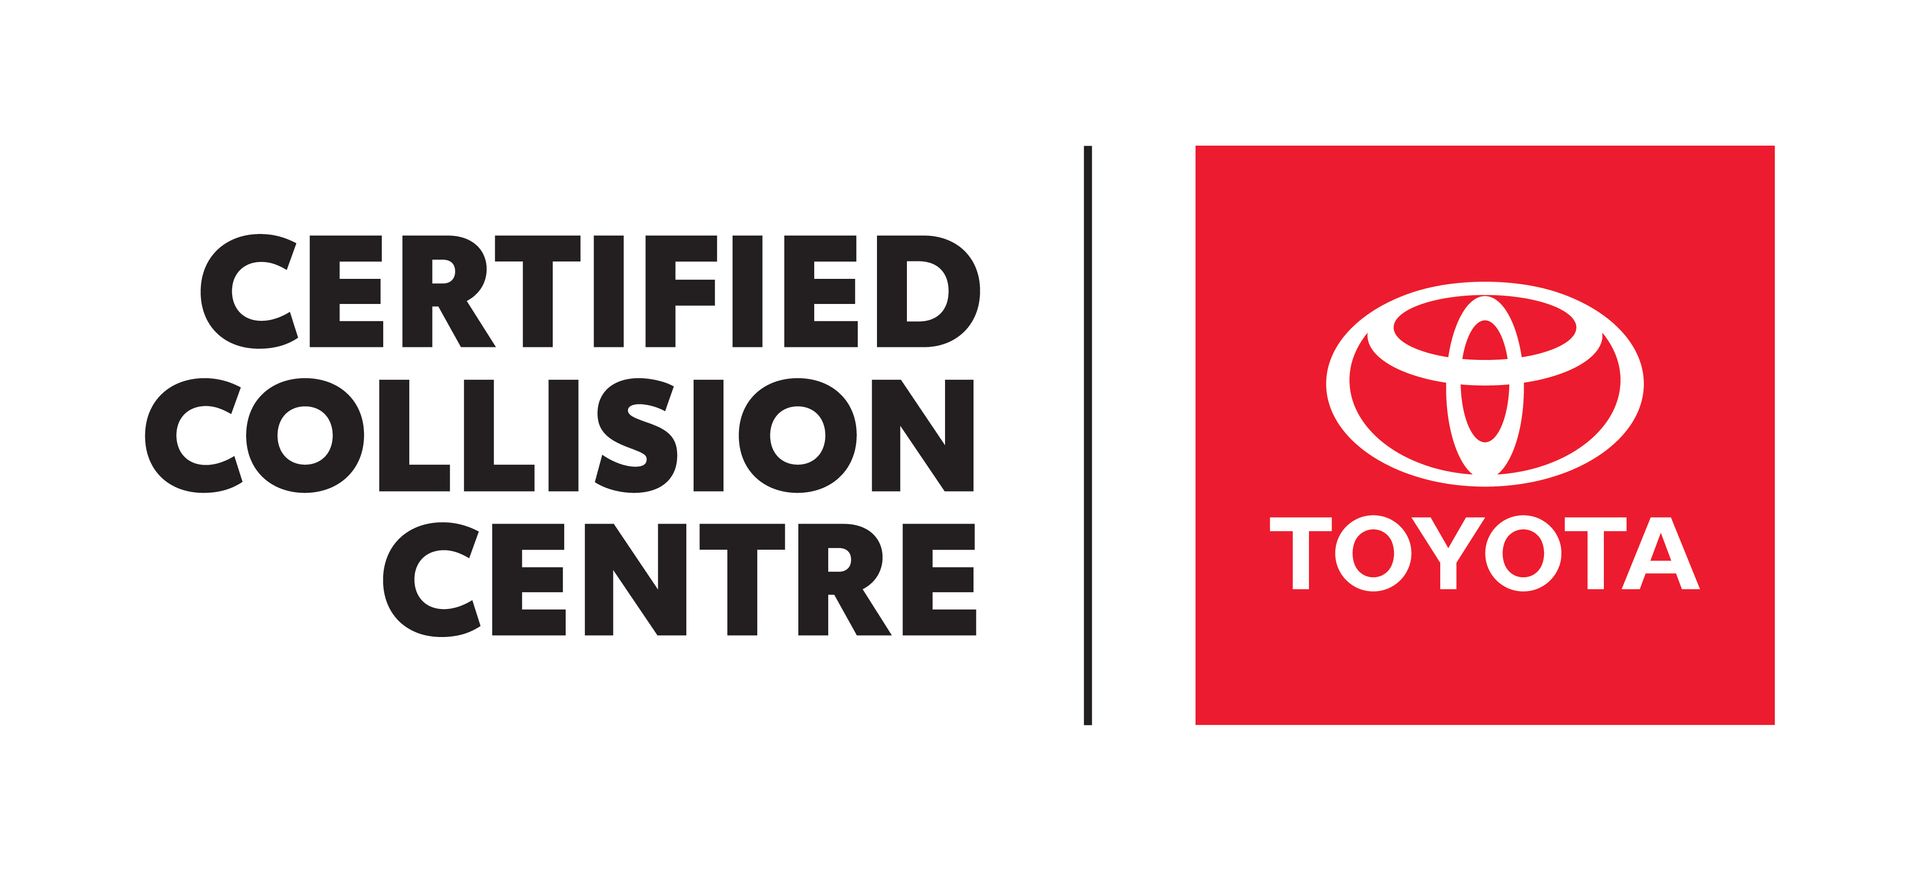 The logo for the certified collision centre is a toyota logo.